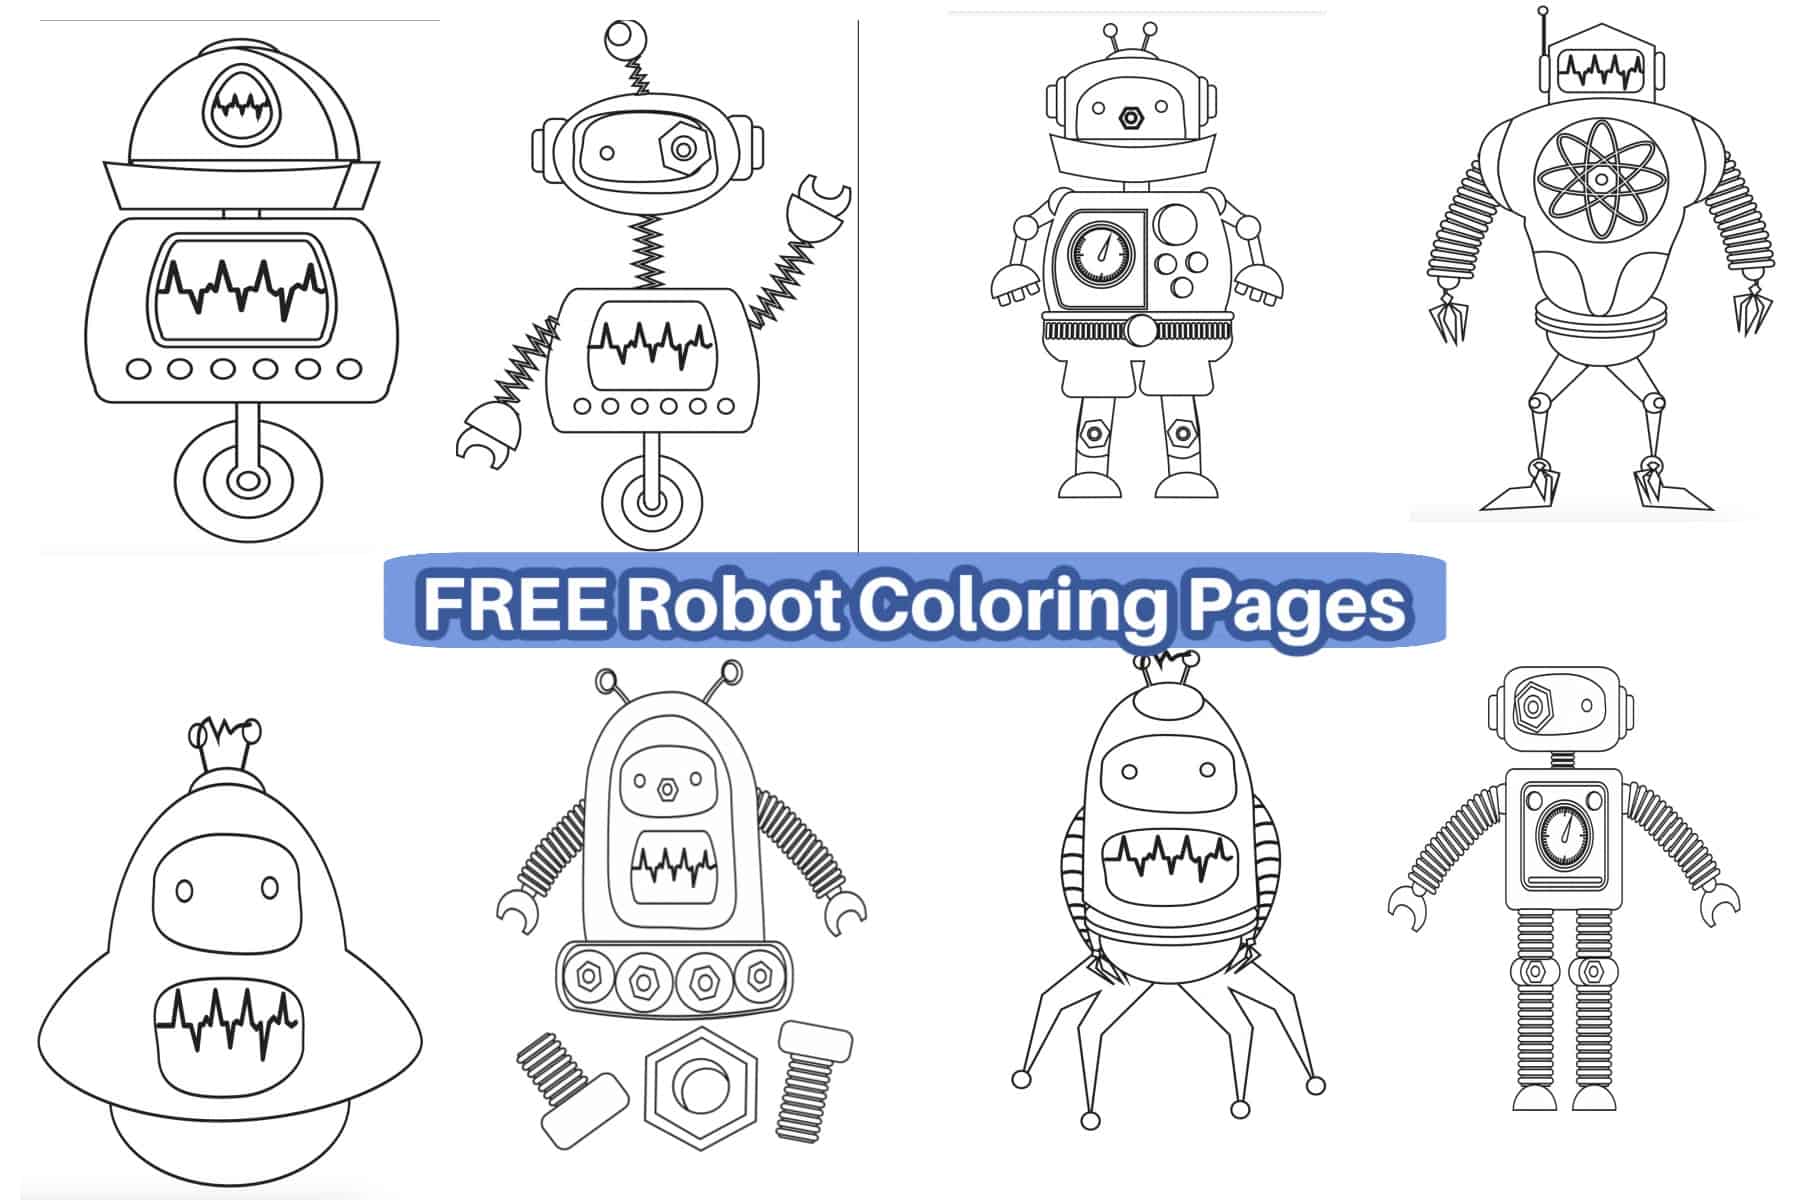 FREE Robot Coloring Sheet Pages for Kids